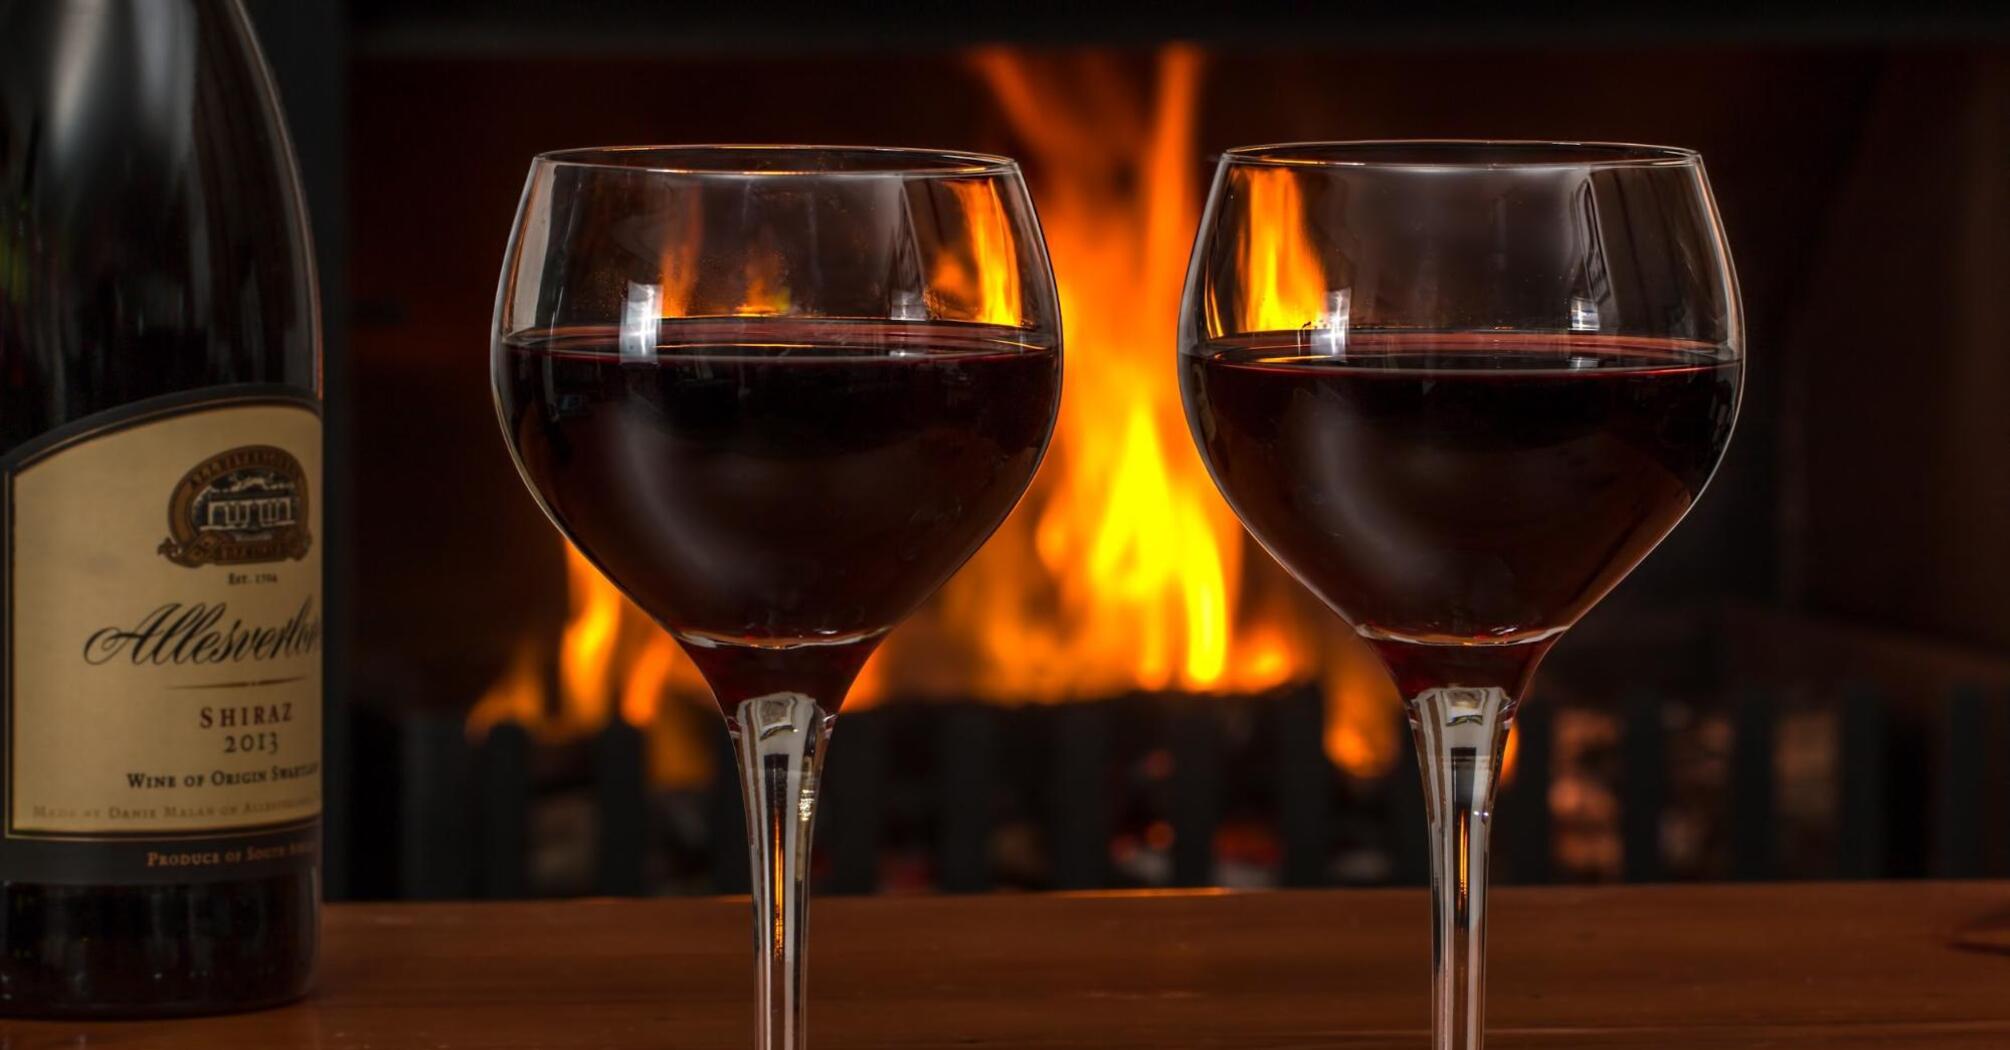 Two glasses of wine on the background of a burning fireplace